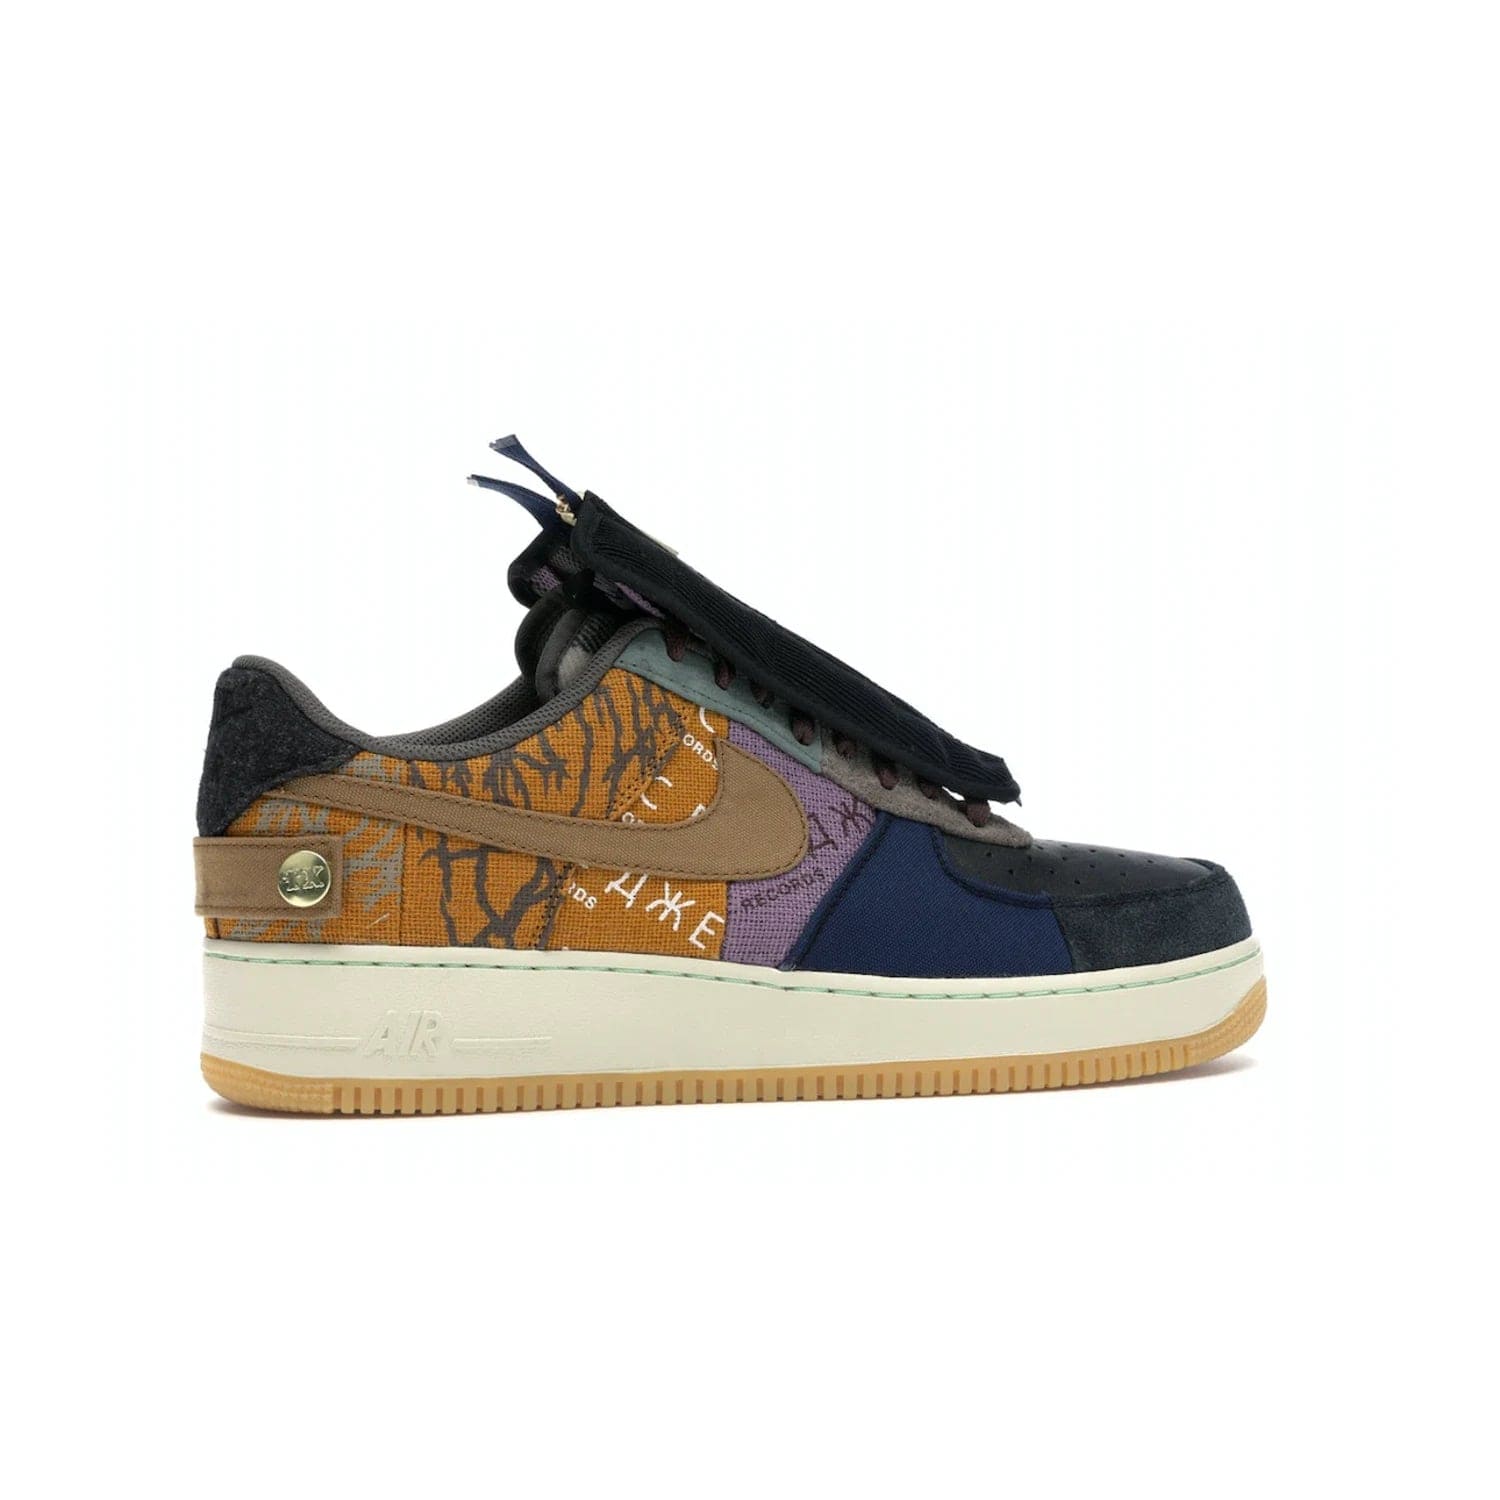 Nike Air Force 1 Low Travis Scott Cactus Jack - Image 35 - Only at www.BallersClubKickz.com - The Nike Air Force 1 Low Travis Scott Cactus Jack features a unique, multi-colored patchwork upper with muted bronze and fossil accents. Includes detachable lace cover, brass zipper, and Cactus Jack insignias. A sail midsole, gum rubber outsole complete the eye-catching design. Perfect for comfort and style with unexpected touches of detail.